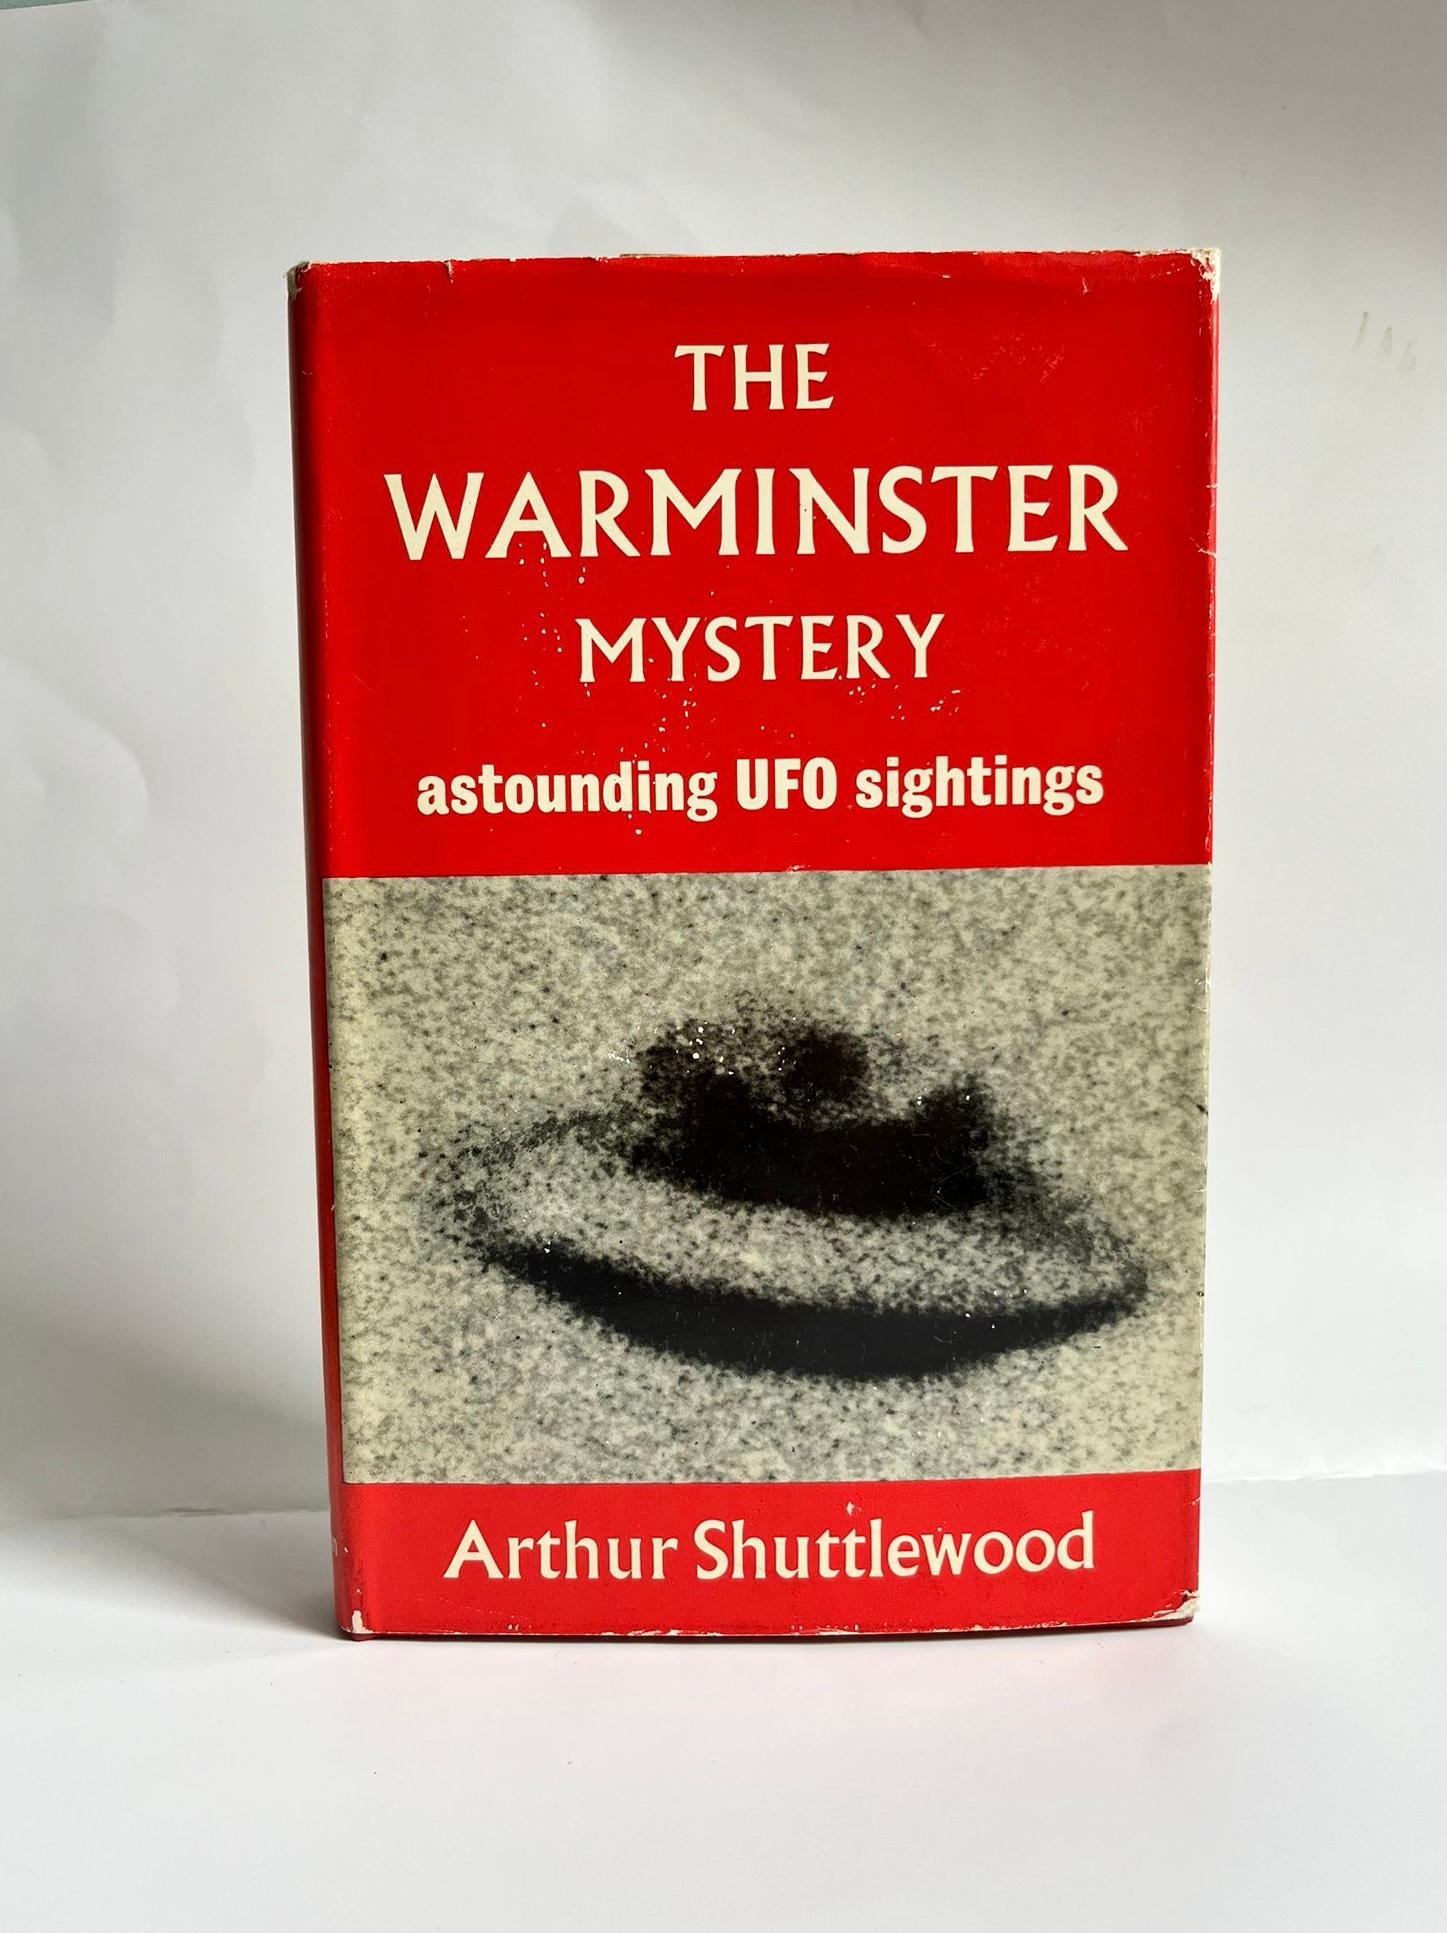 The Warminster Mystery: Astounding UFO Sightings by Arthur Shuttlewood